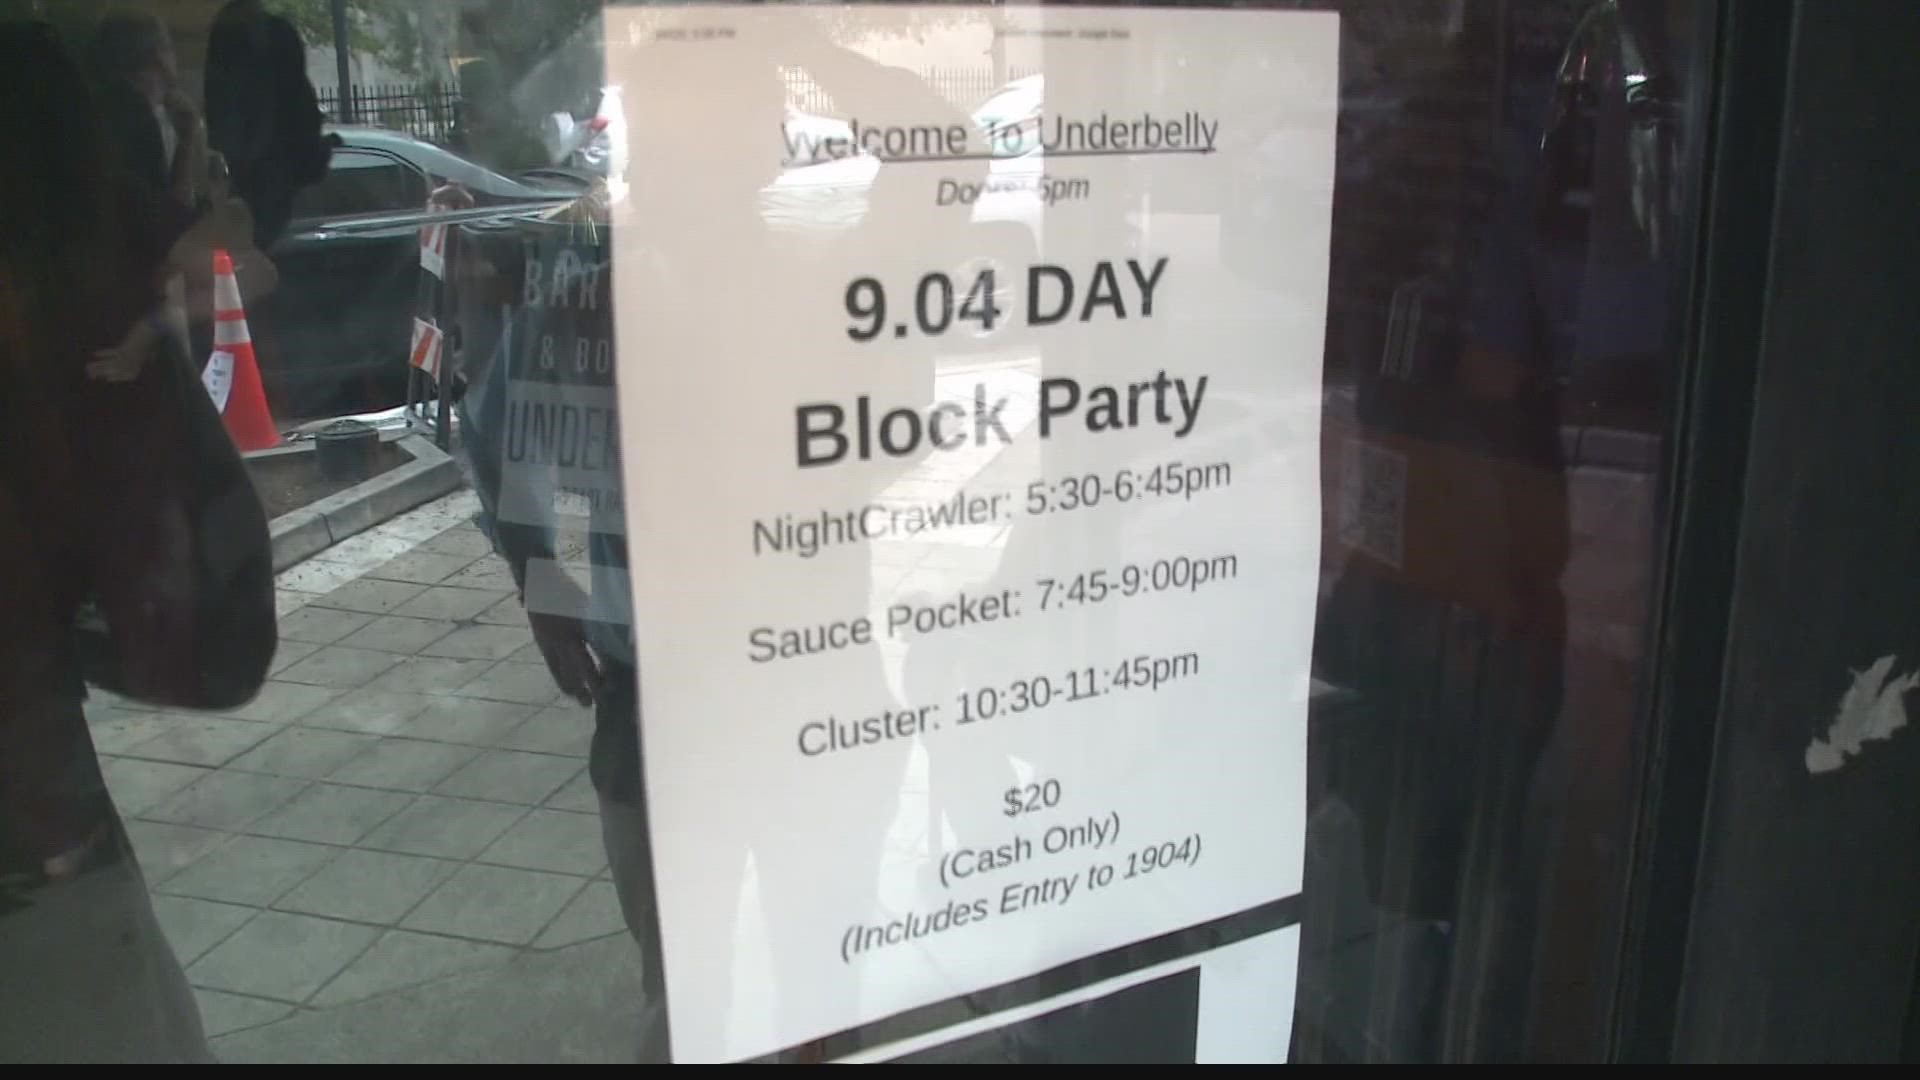 All over town, Jacksonville was celebrating 904 day Sunday!